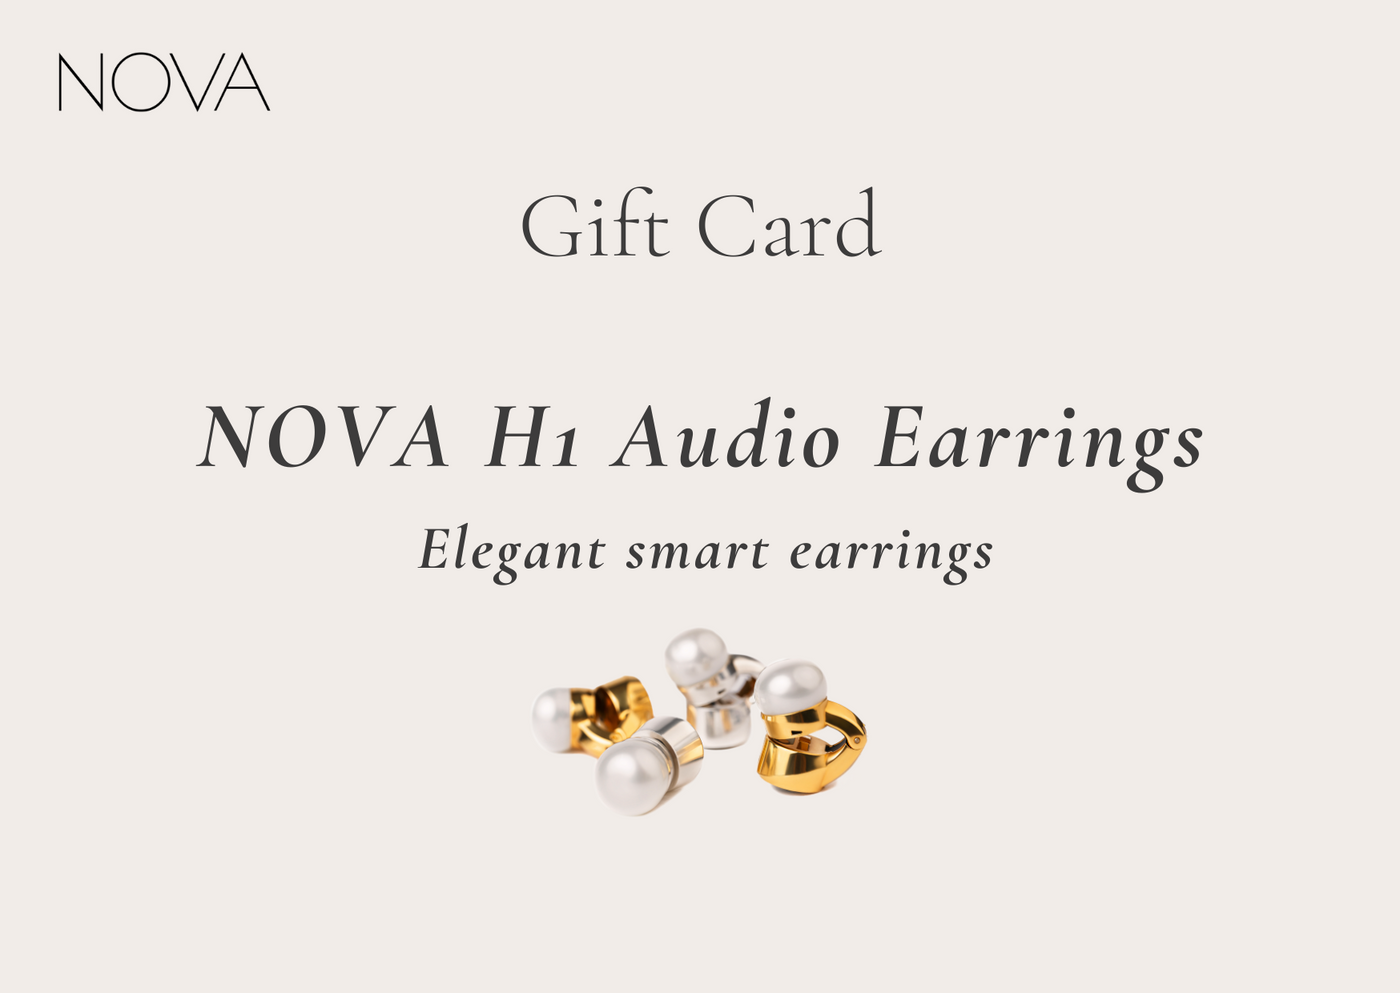 World's first Audio Earrings with real pearls! | NOVA H1 - YouTube